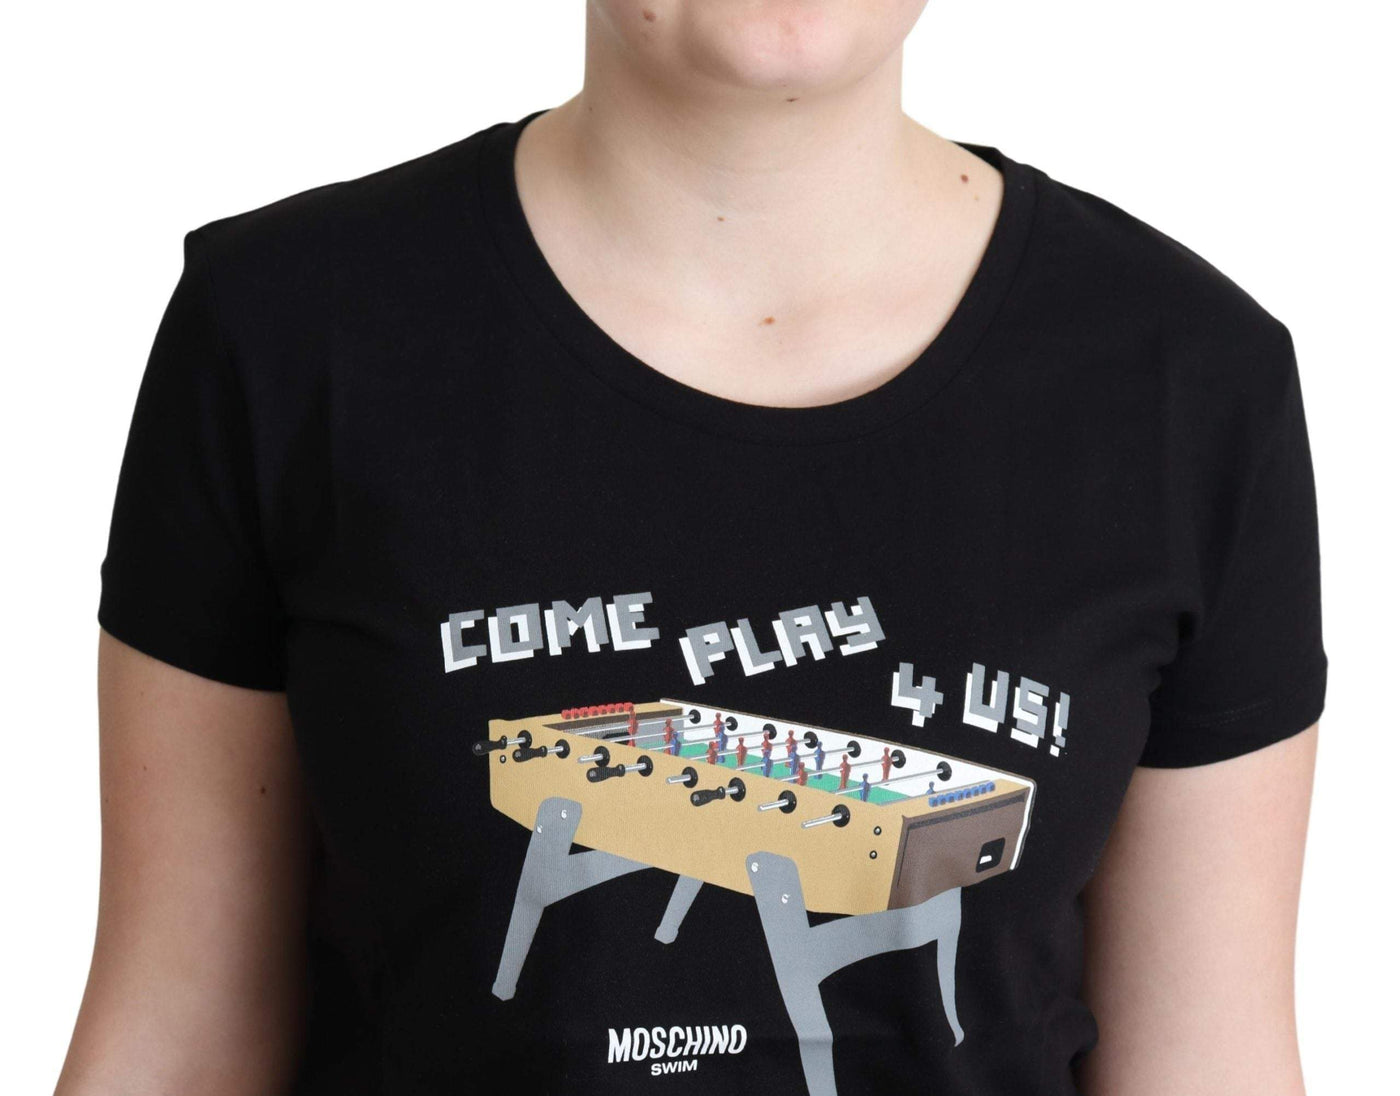 Moschino Black Cotton Come Play 4 Us Print Tops T-shirt #women, Black, feed-agegroup-adult, feed-color-Black, feed-gender-female, IT40|S, IT42|M, IT44|L, IT46|XL, Moschino, Tops & T-Shirts - Women - Clothing, Women - New Arrivals at SEYMAYKA